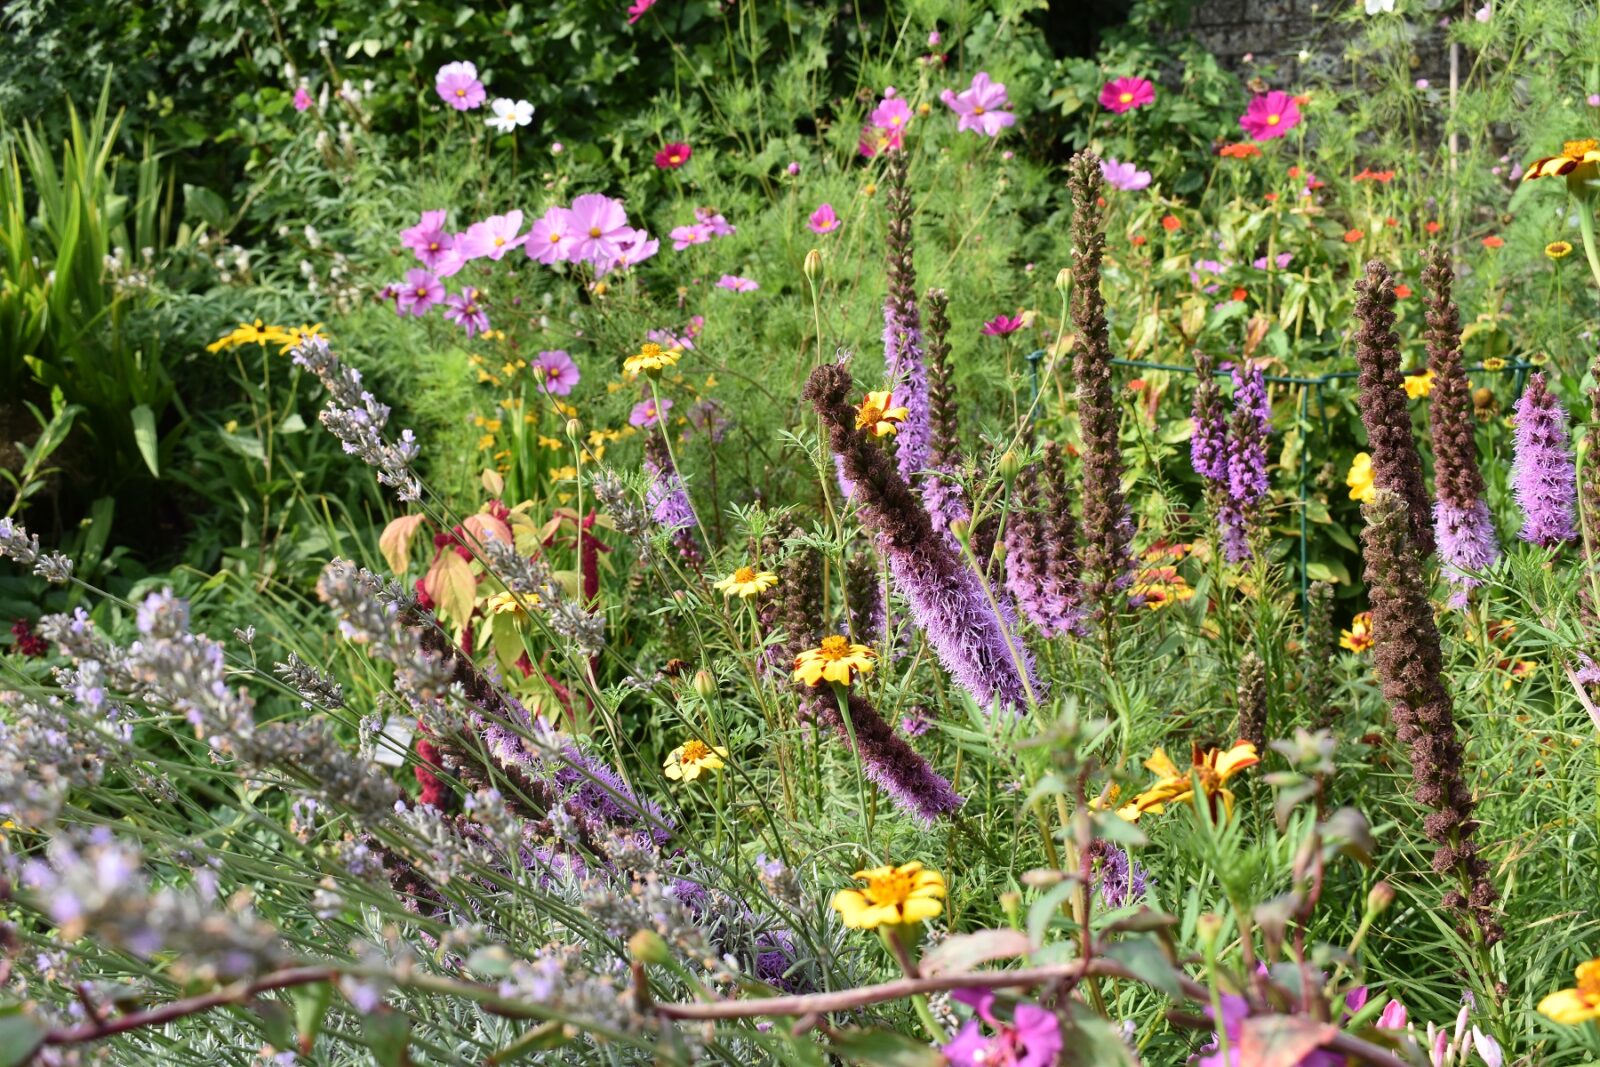 A vibrant flowerbed in the garden at Jane Austen's House